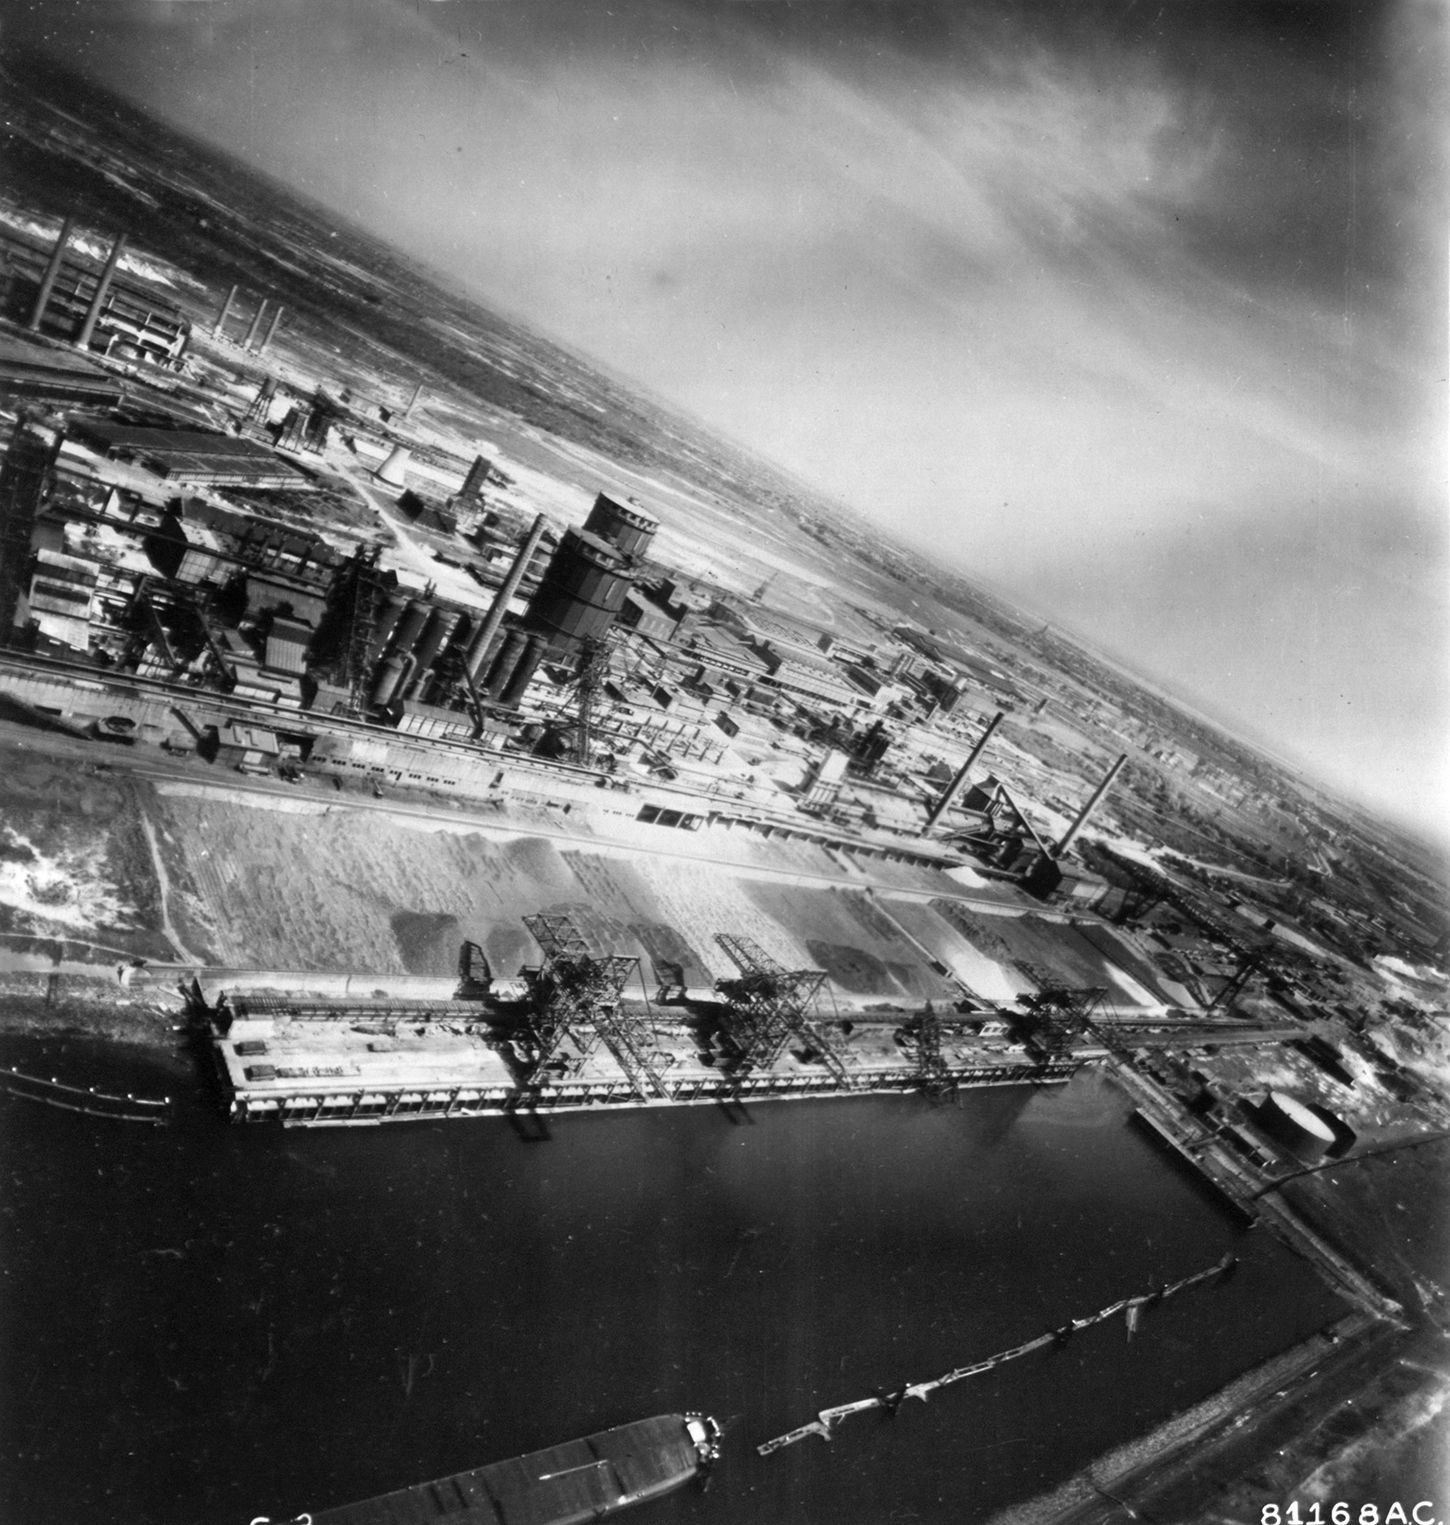 Aerial view of a damaged industrial site in IJmuiden from a later bombing raid. Despite low-altitude bombing, early B-26 raids were ineffective and resulted in extensive losses of men and planes.